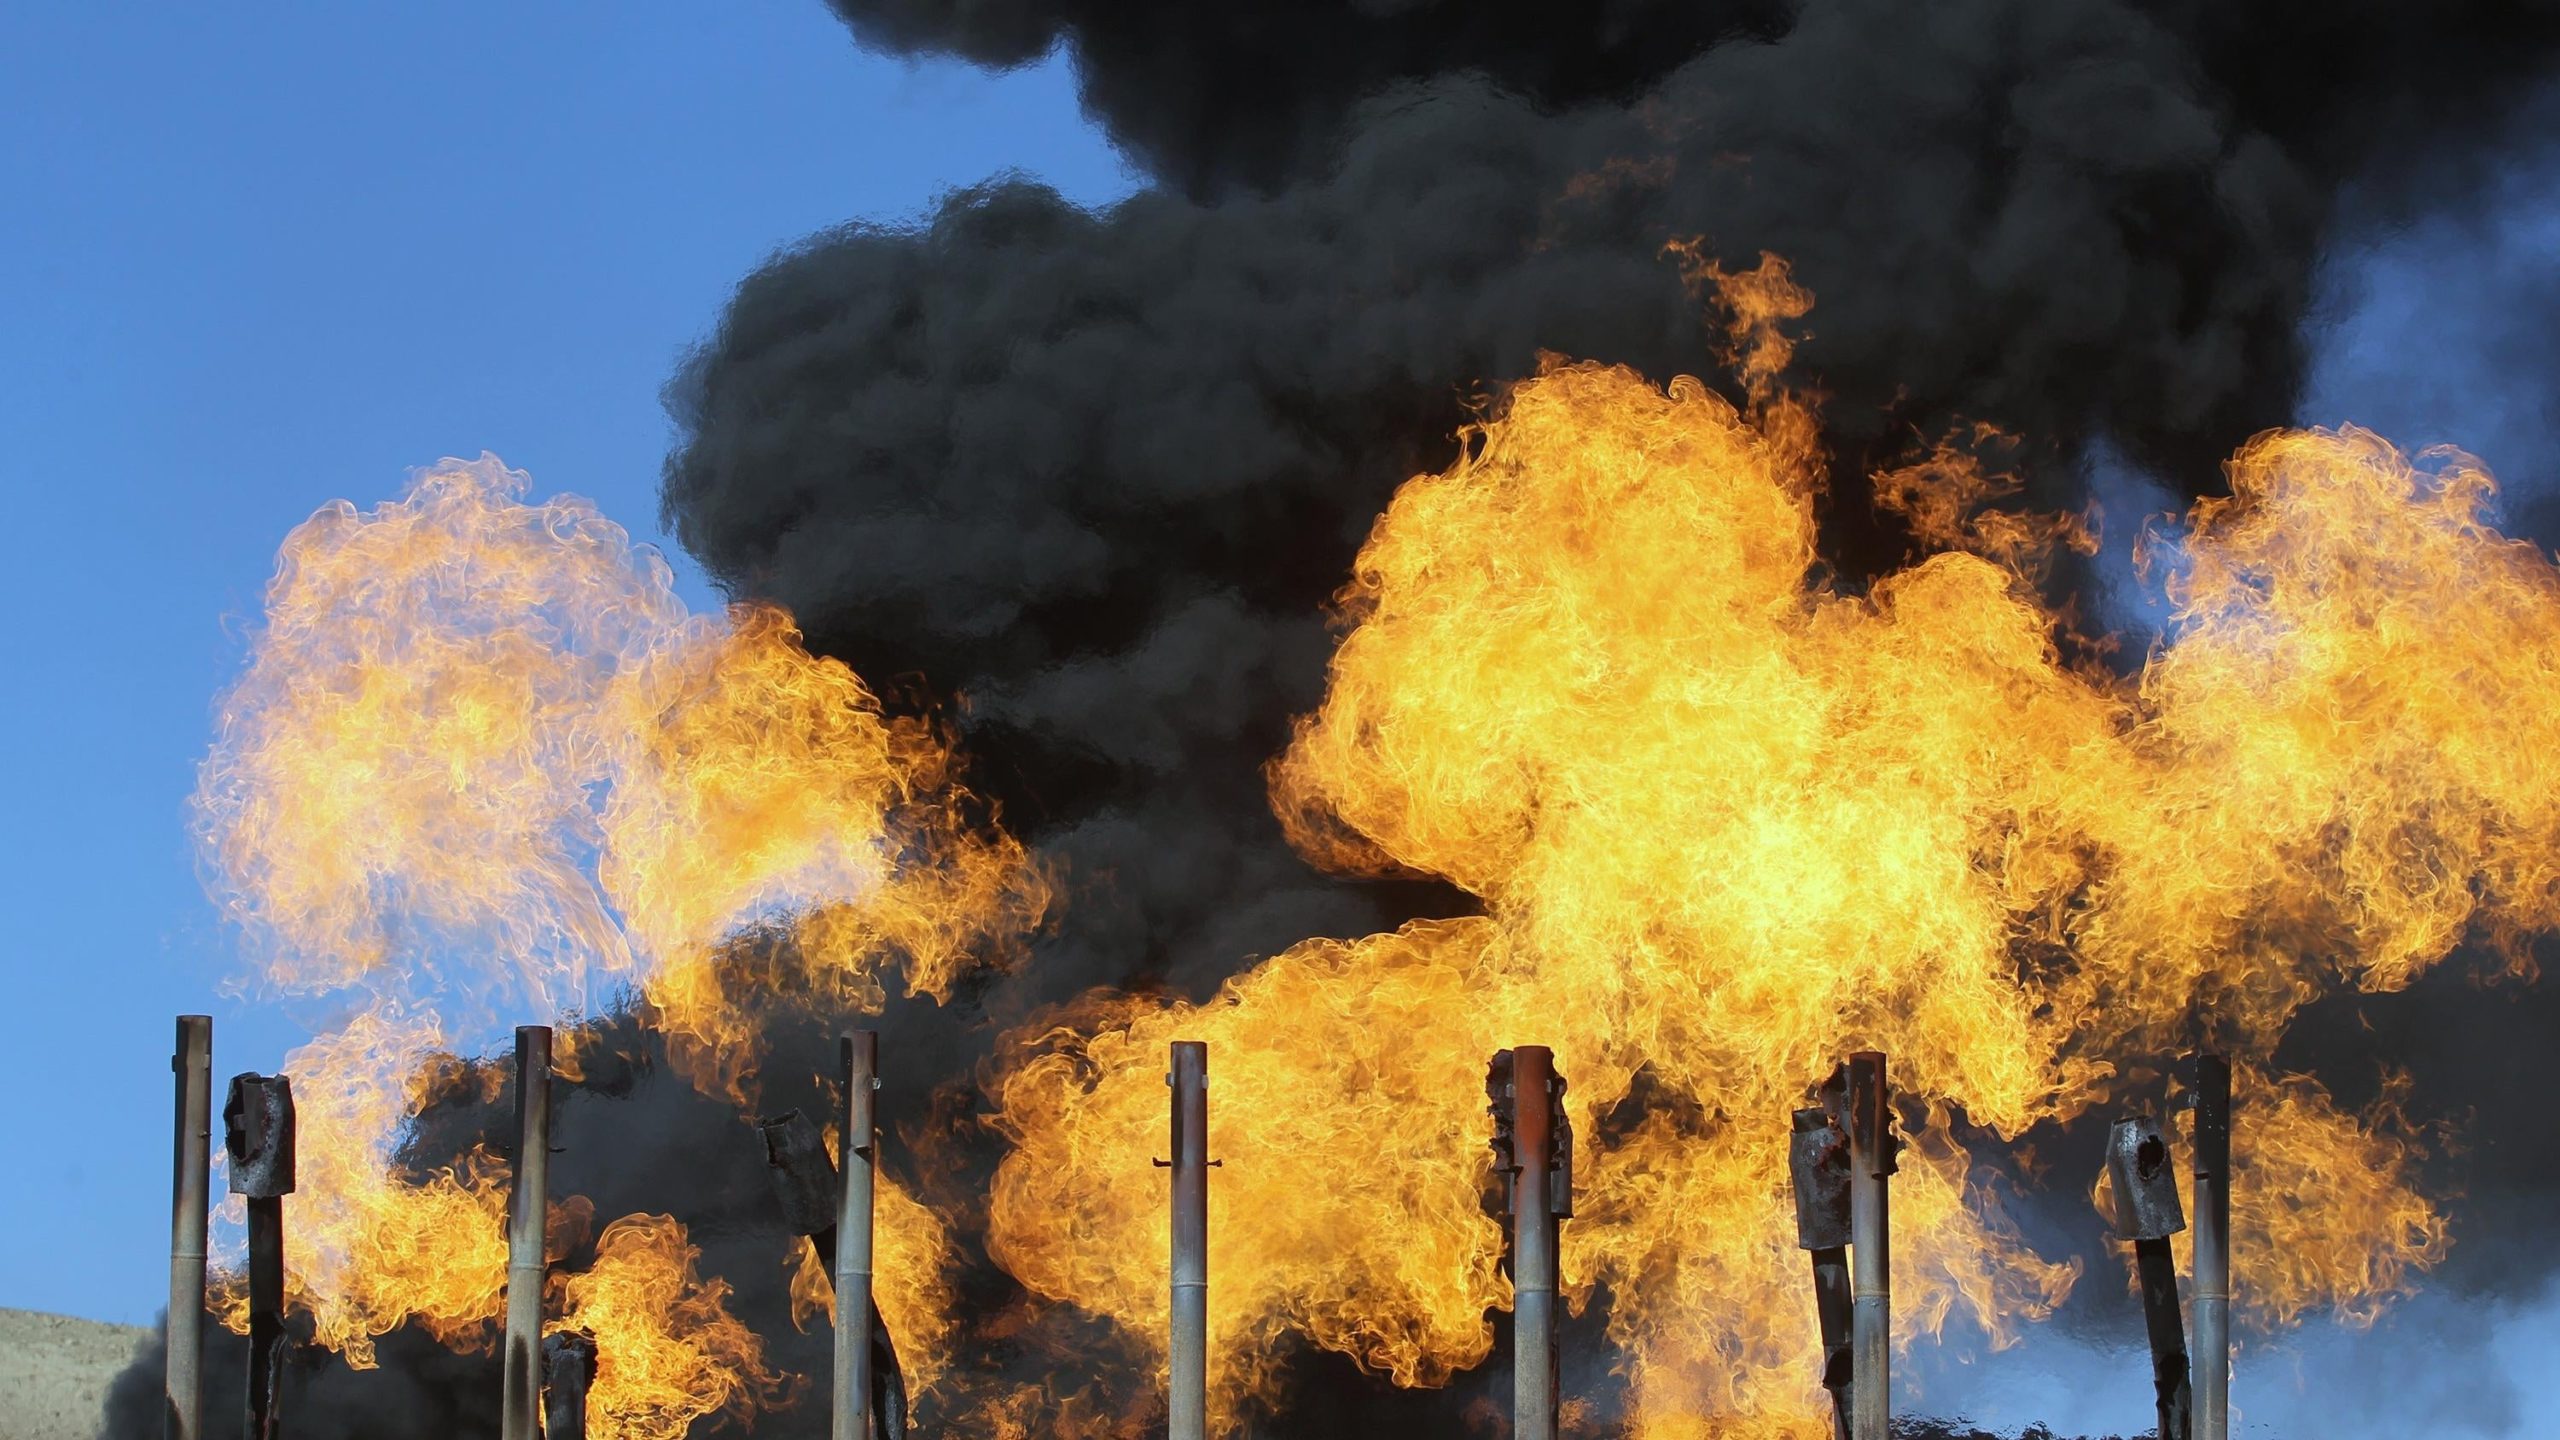 Gas flares at the Havana oil field in Iraq. (Photo: Ahmad Al-Rubaye/AFP, Getty Images)